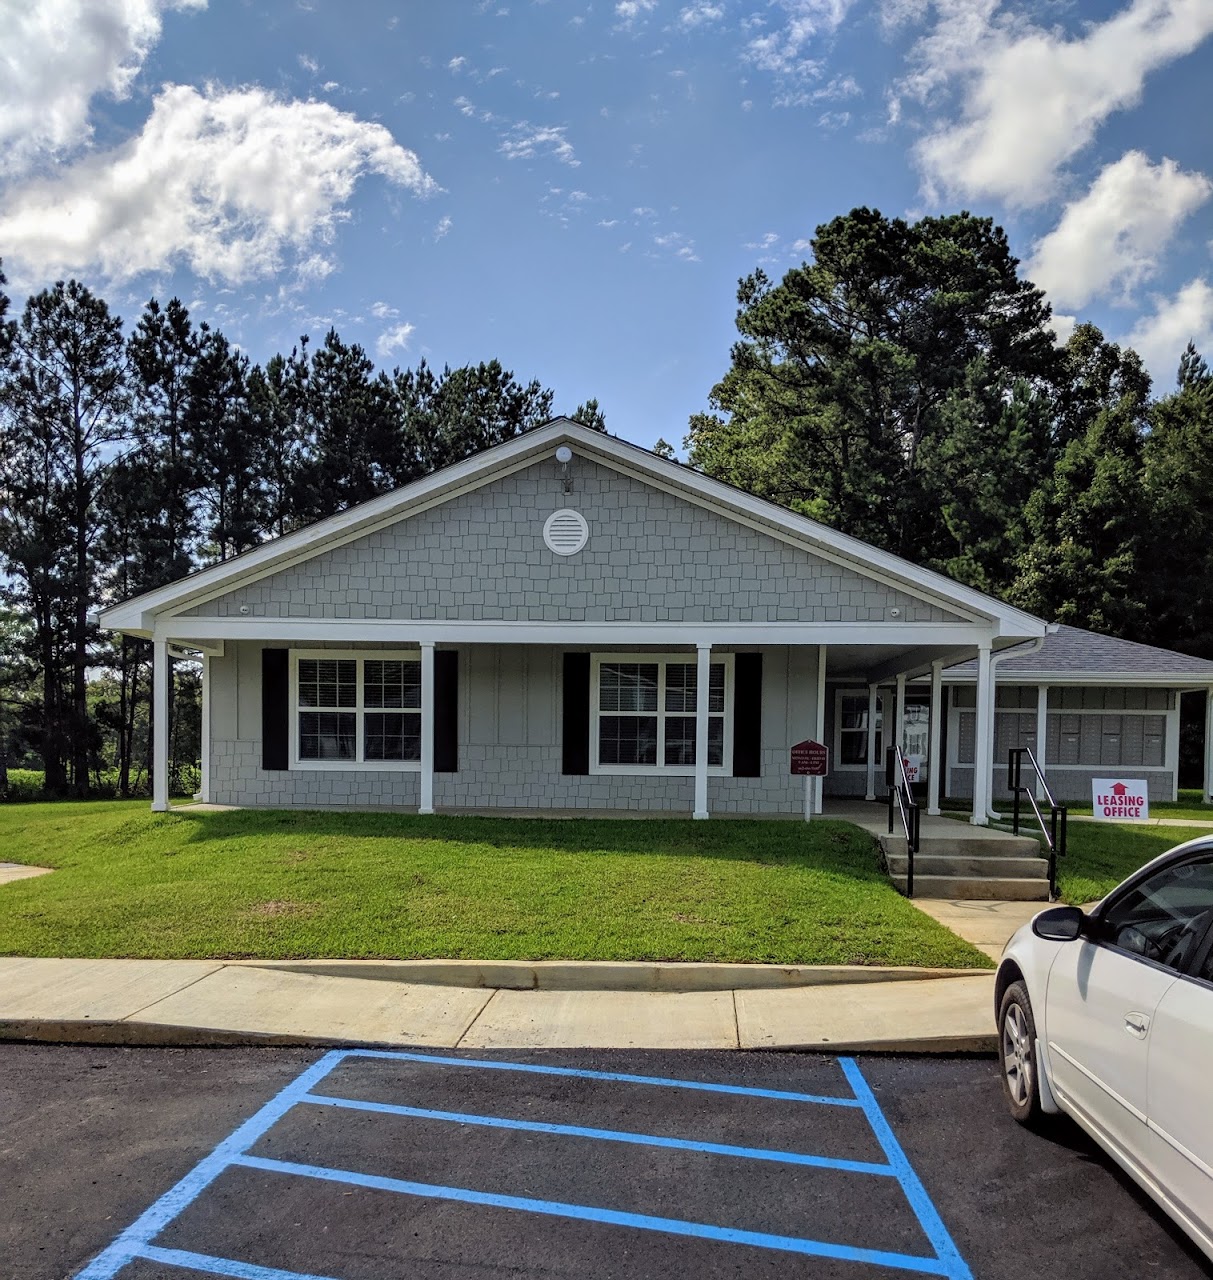 Photo of PINE VIEW I. Affordable housing located at 707 AIRPORT ROAD HOUSTON, MS 38851